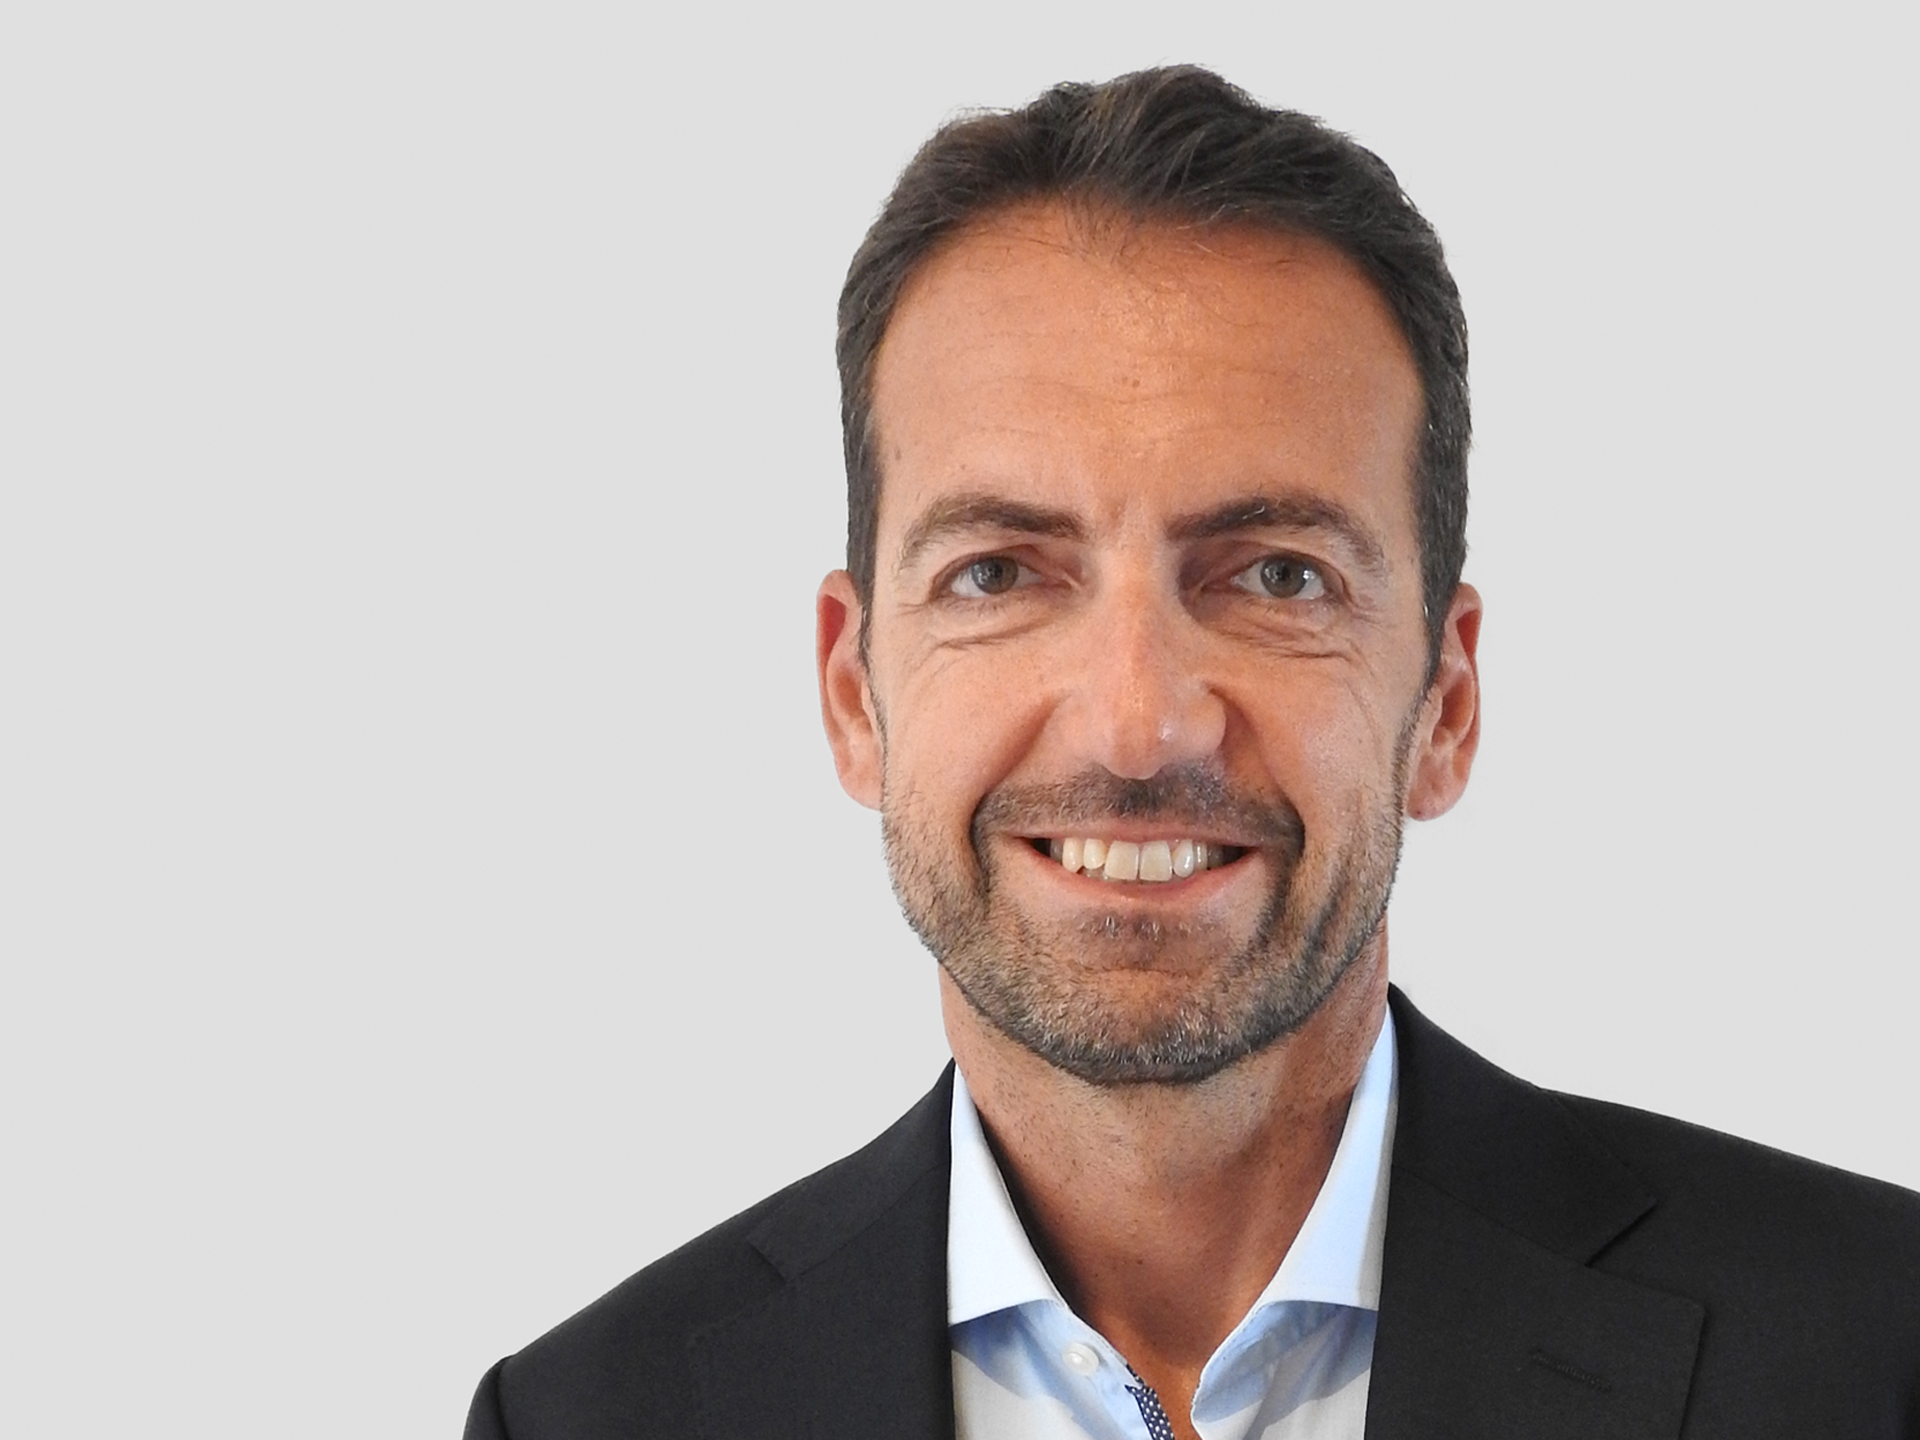 Doros Theodorou becomes part of the MEININGER Board as Chief Commercial Officer